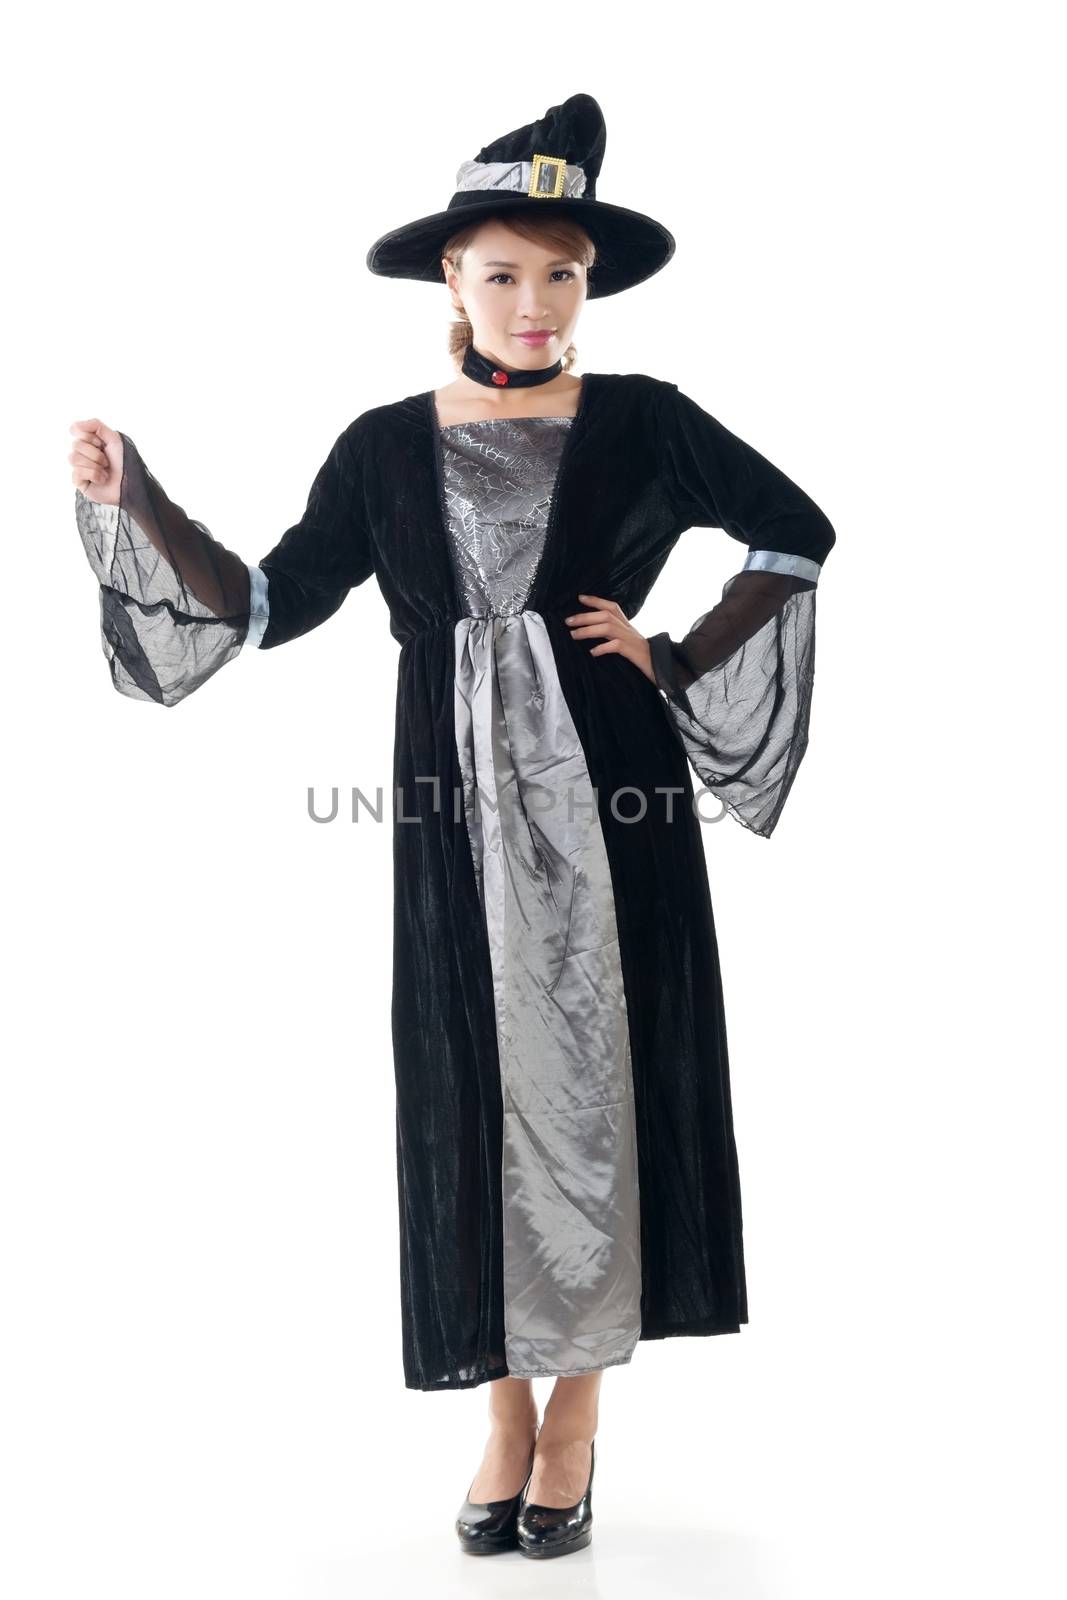 Asian witch hold something, full length portrait isolated on white.